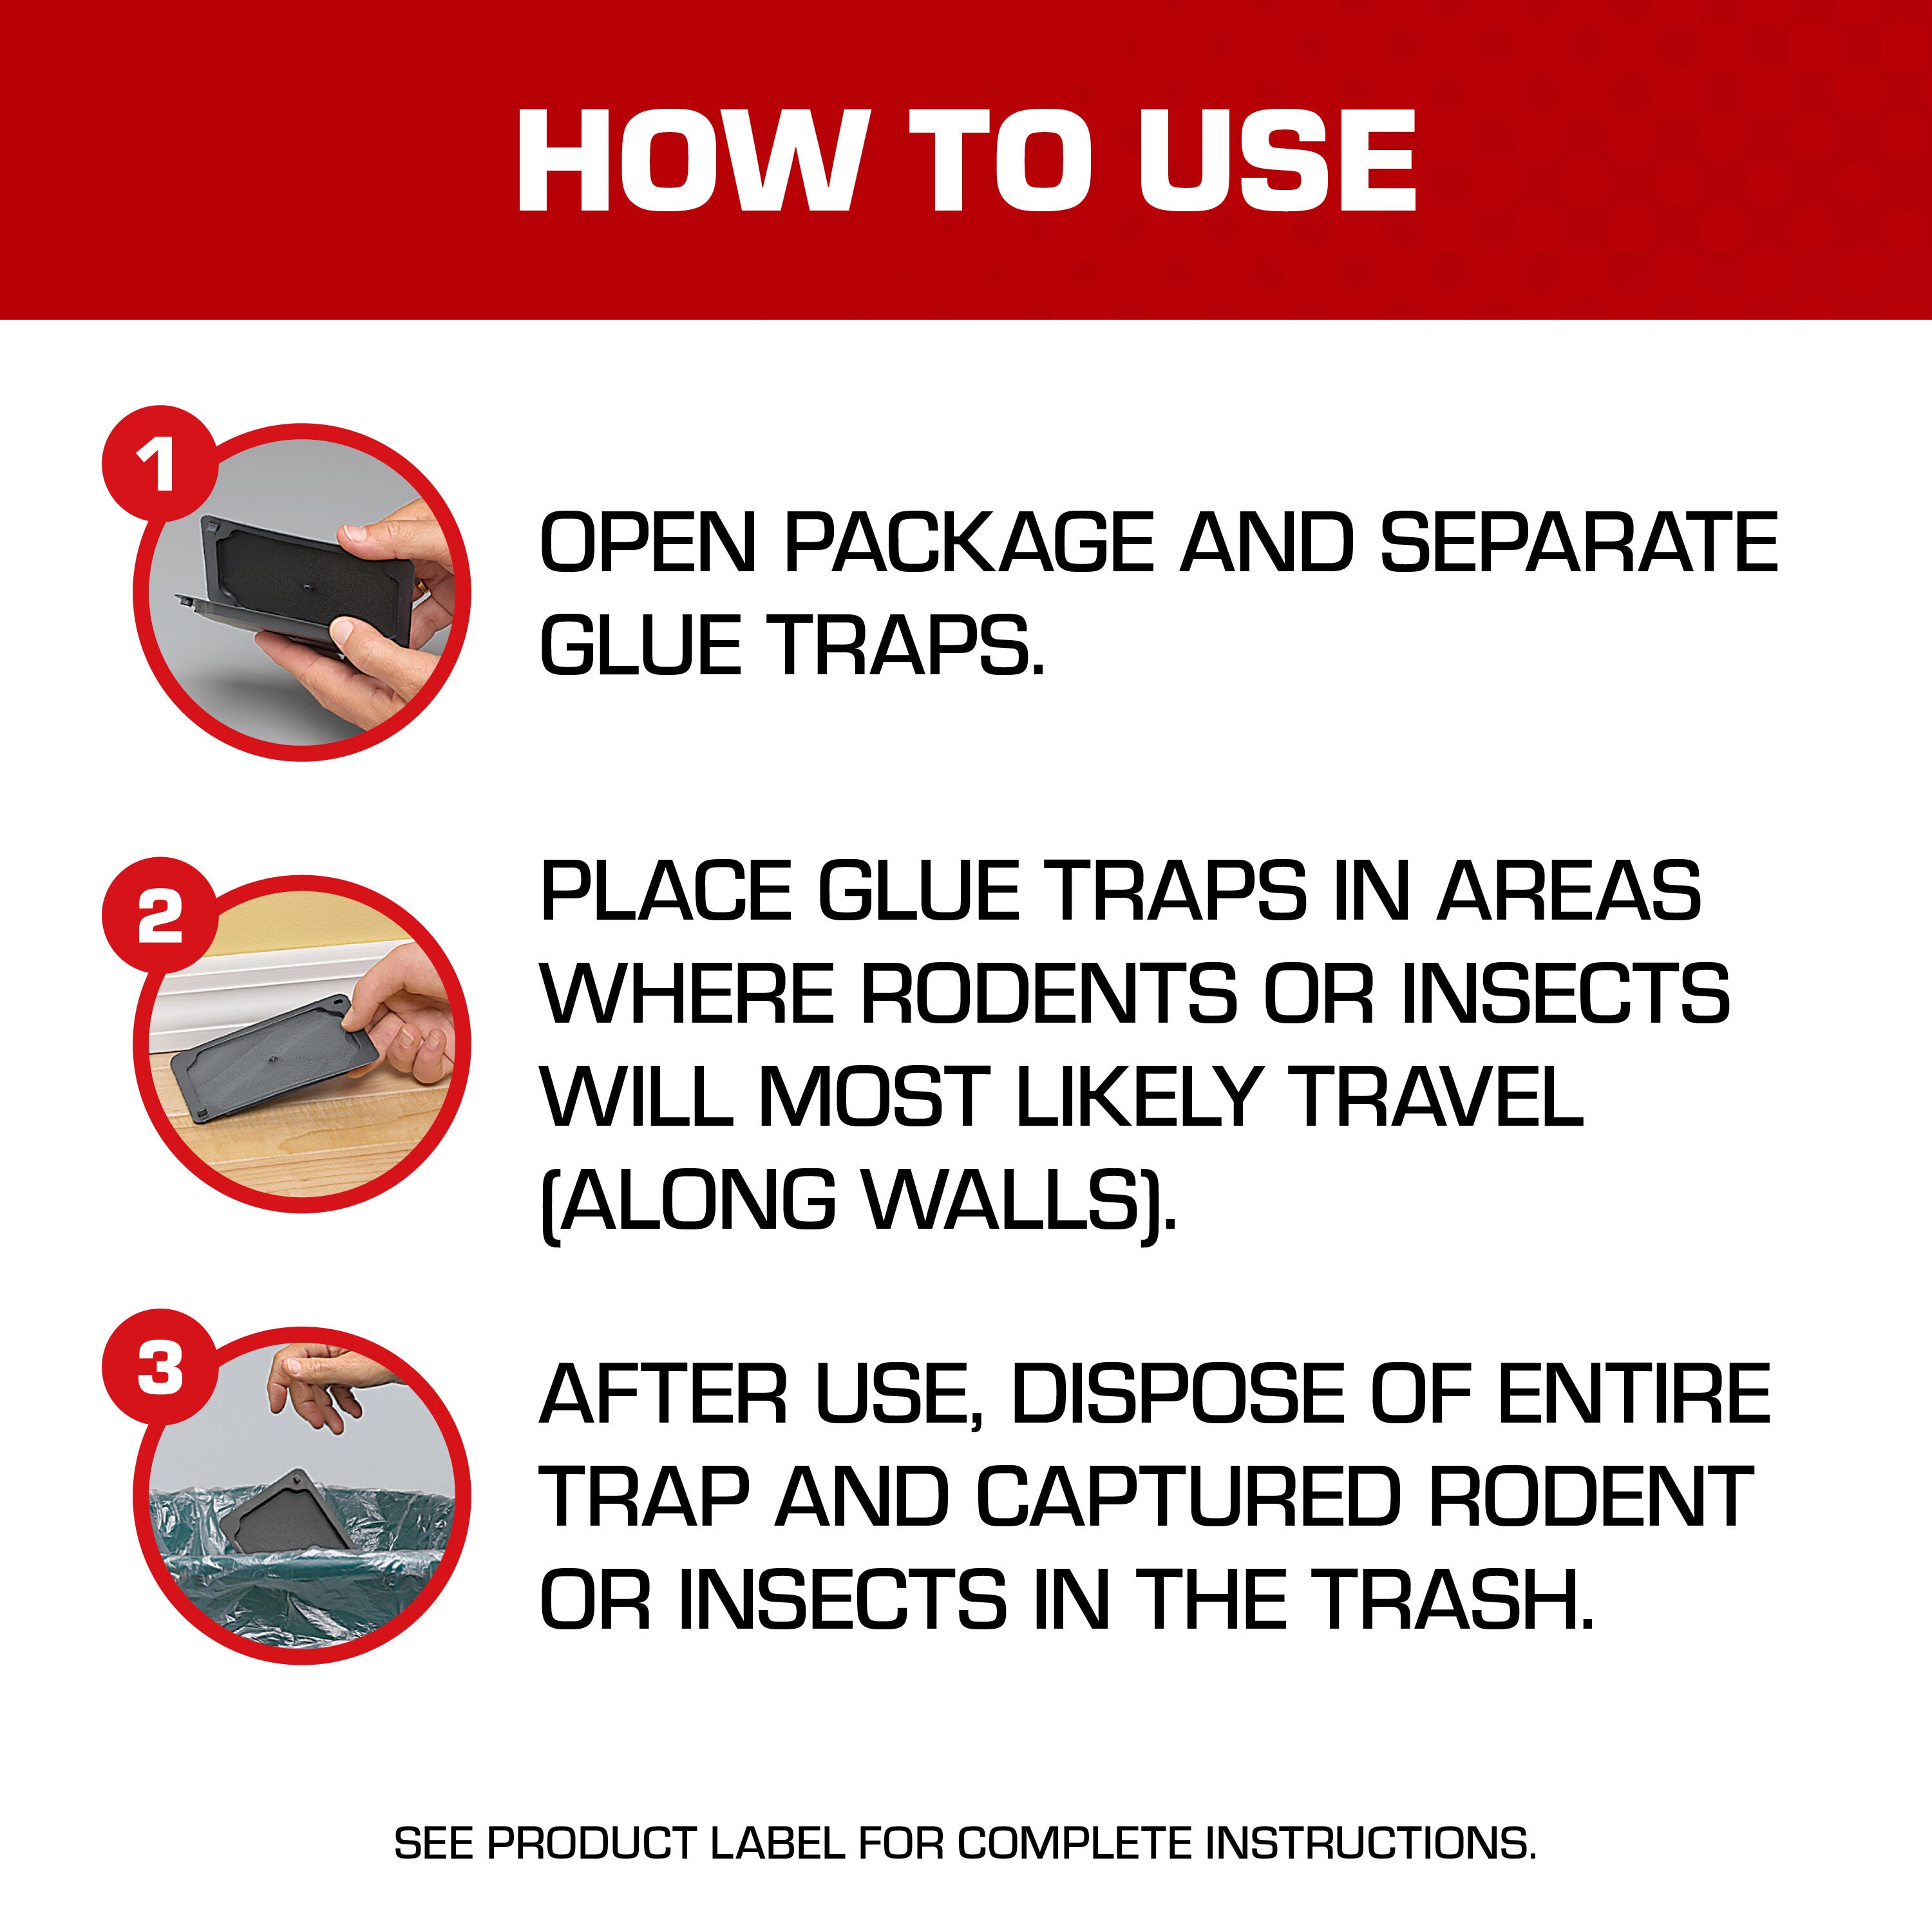 Tomcat Mouse Trap with Immediate Grip Glue, Ready-To-Use, 4 Traps